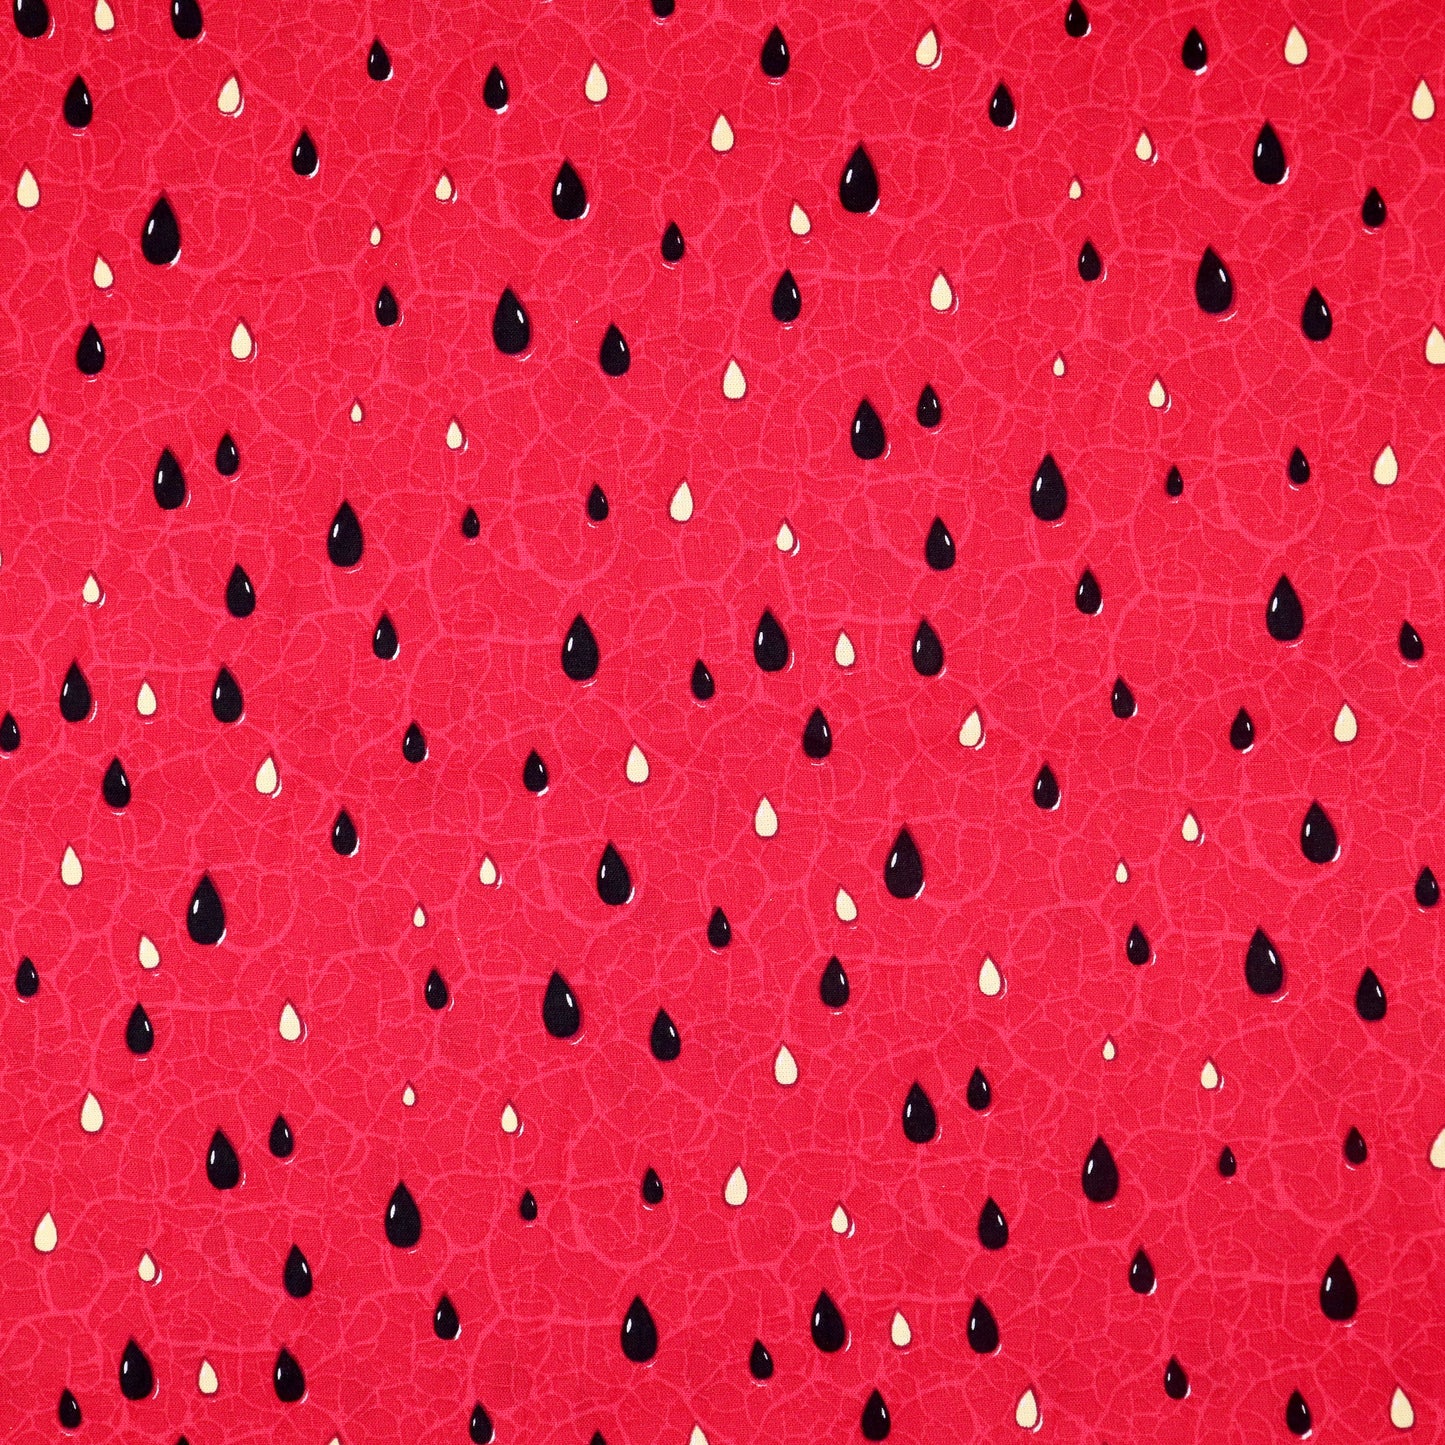 Watermelon Seeds - Quilting Cotton